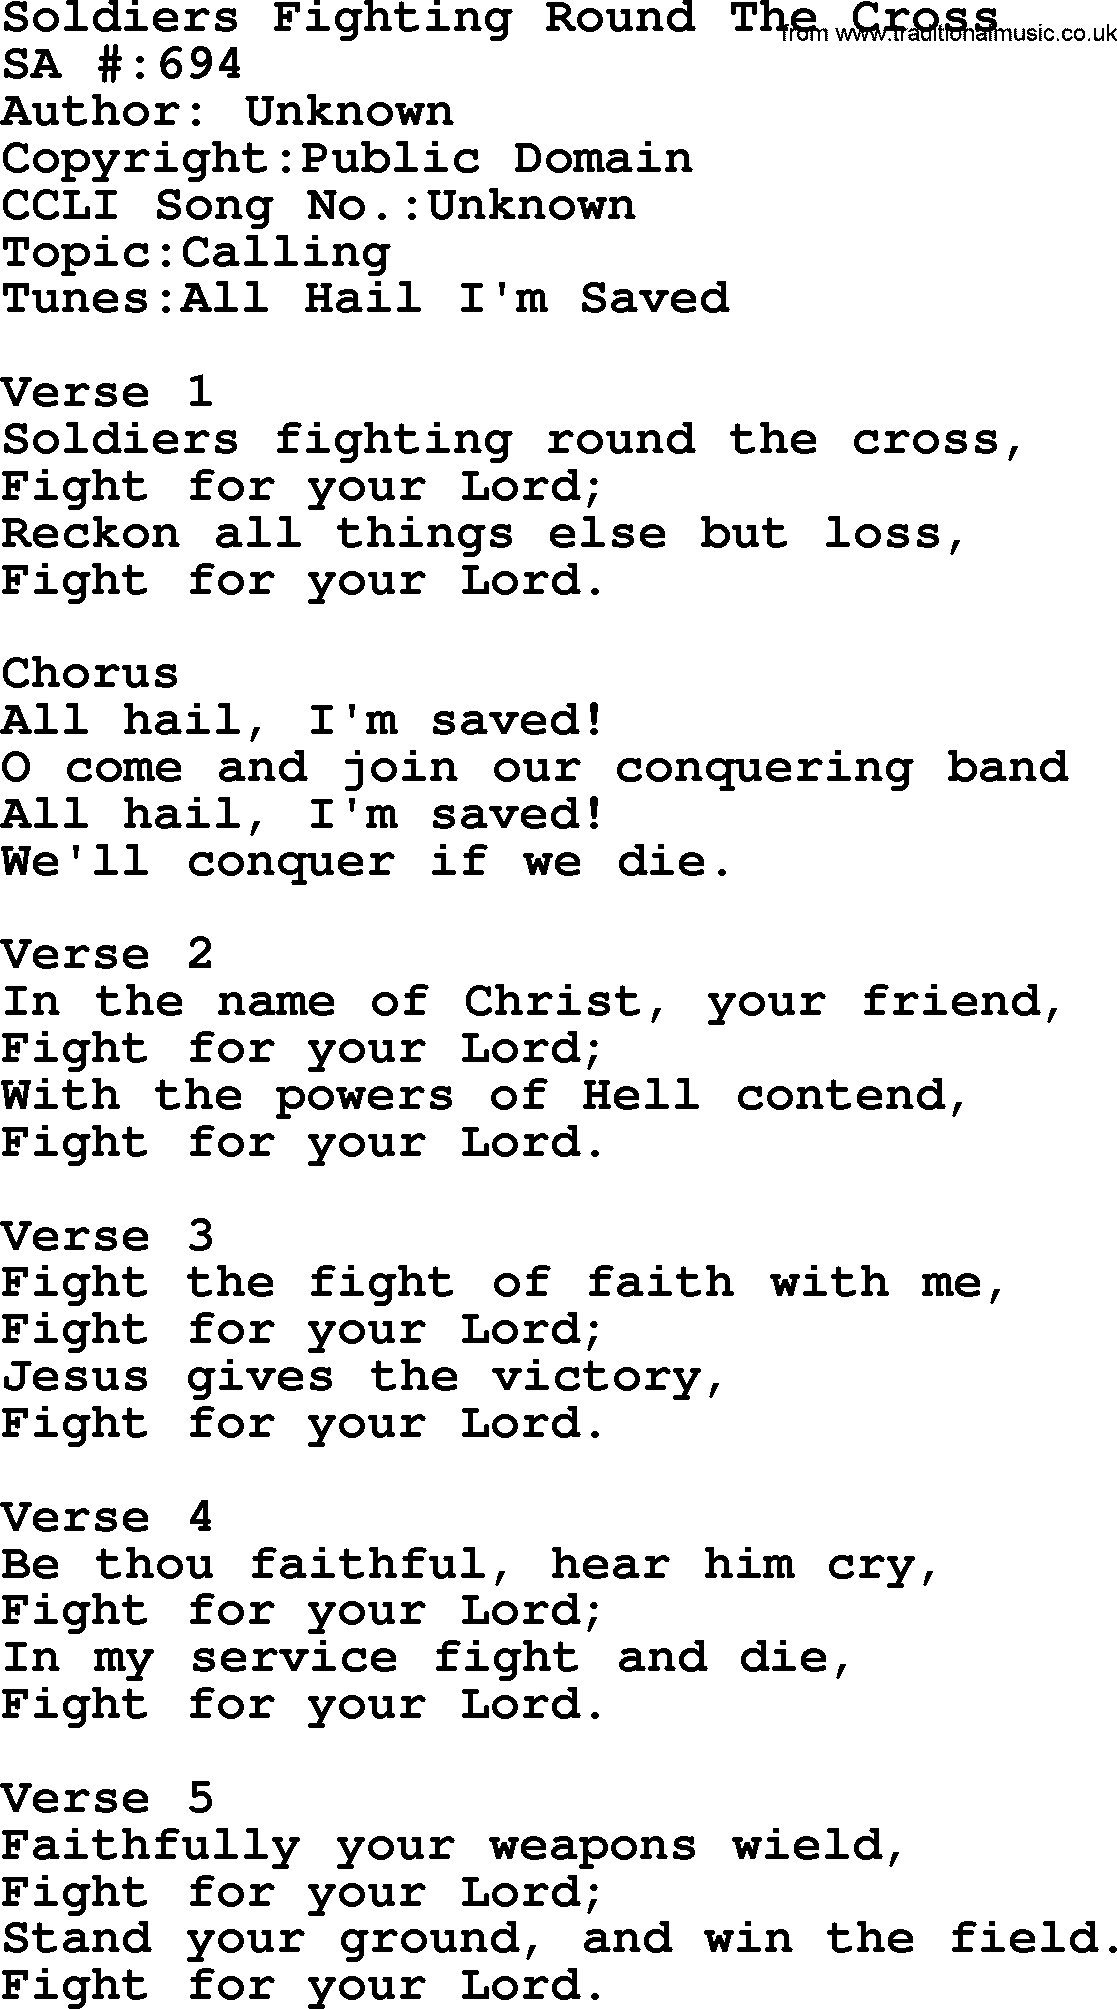 Salvation Army Hymnal, title: Soldiers Fighting Round The Cross, with lyrics and PDF,